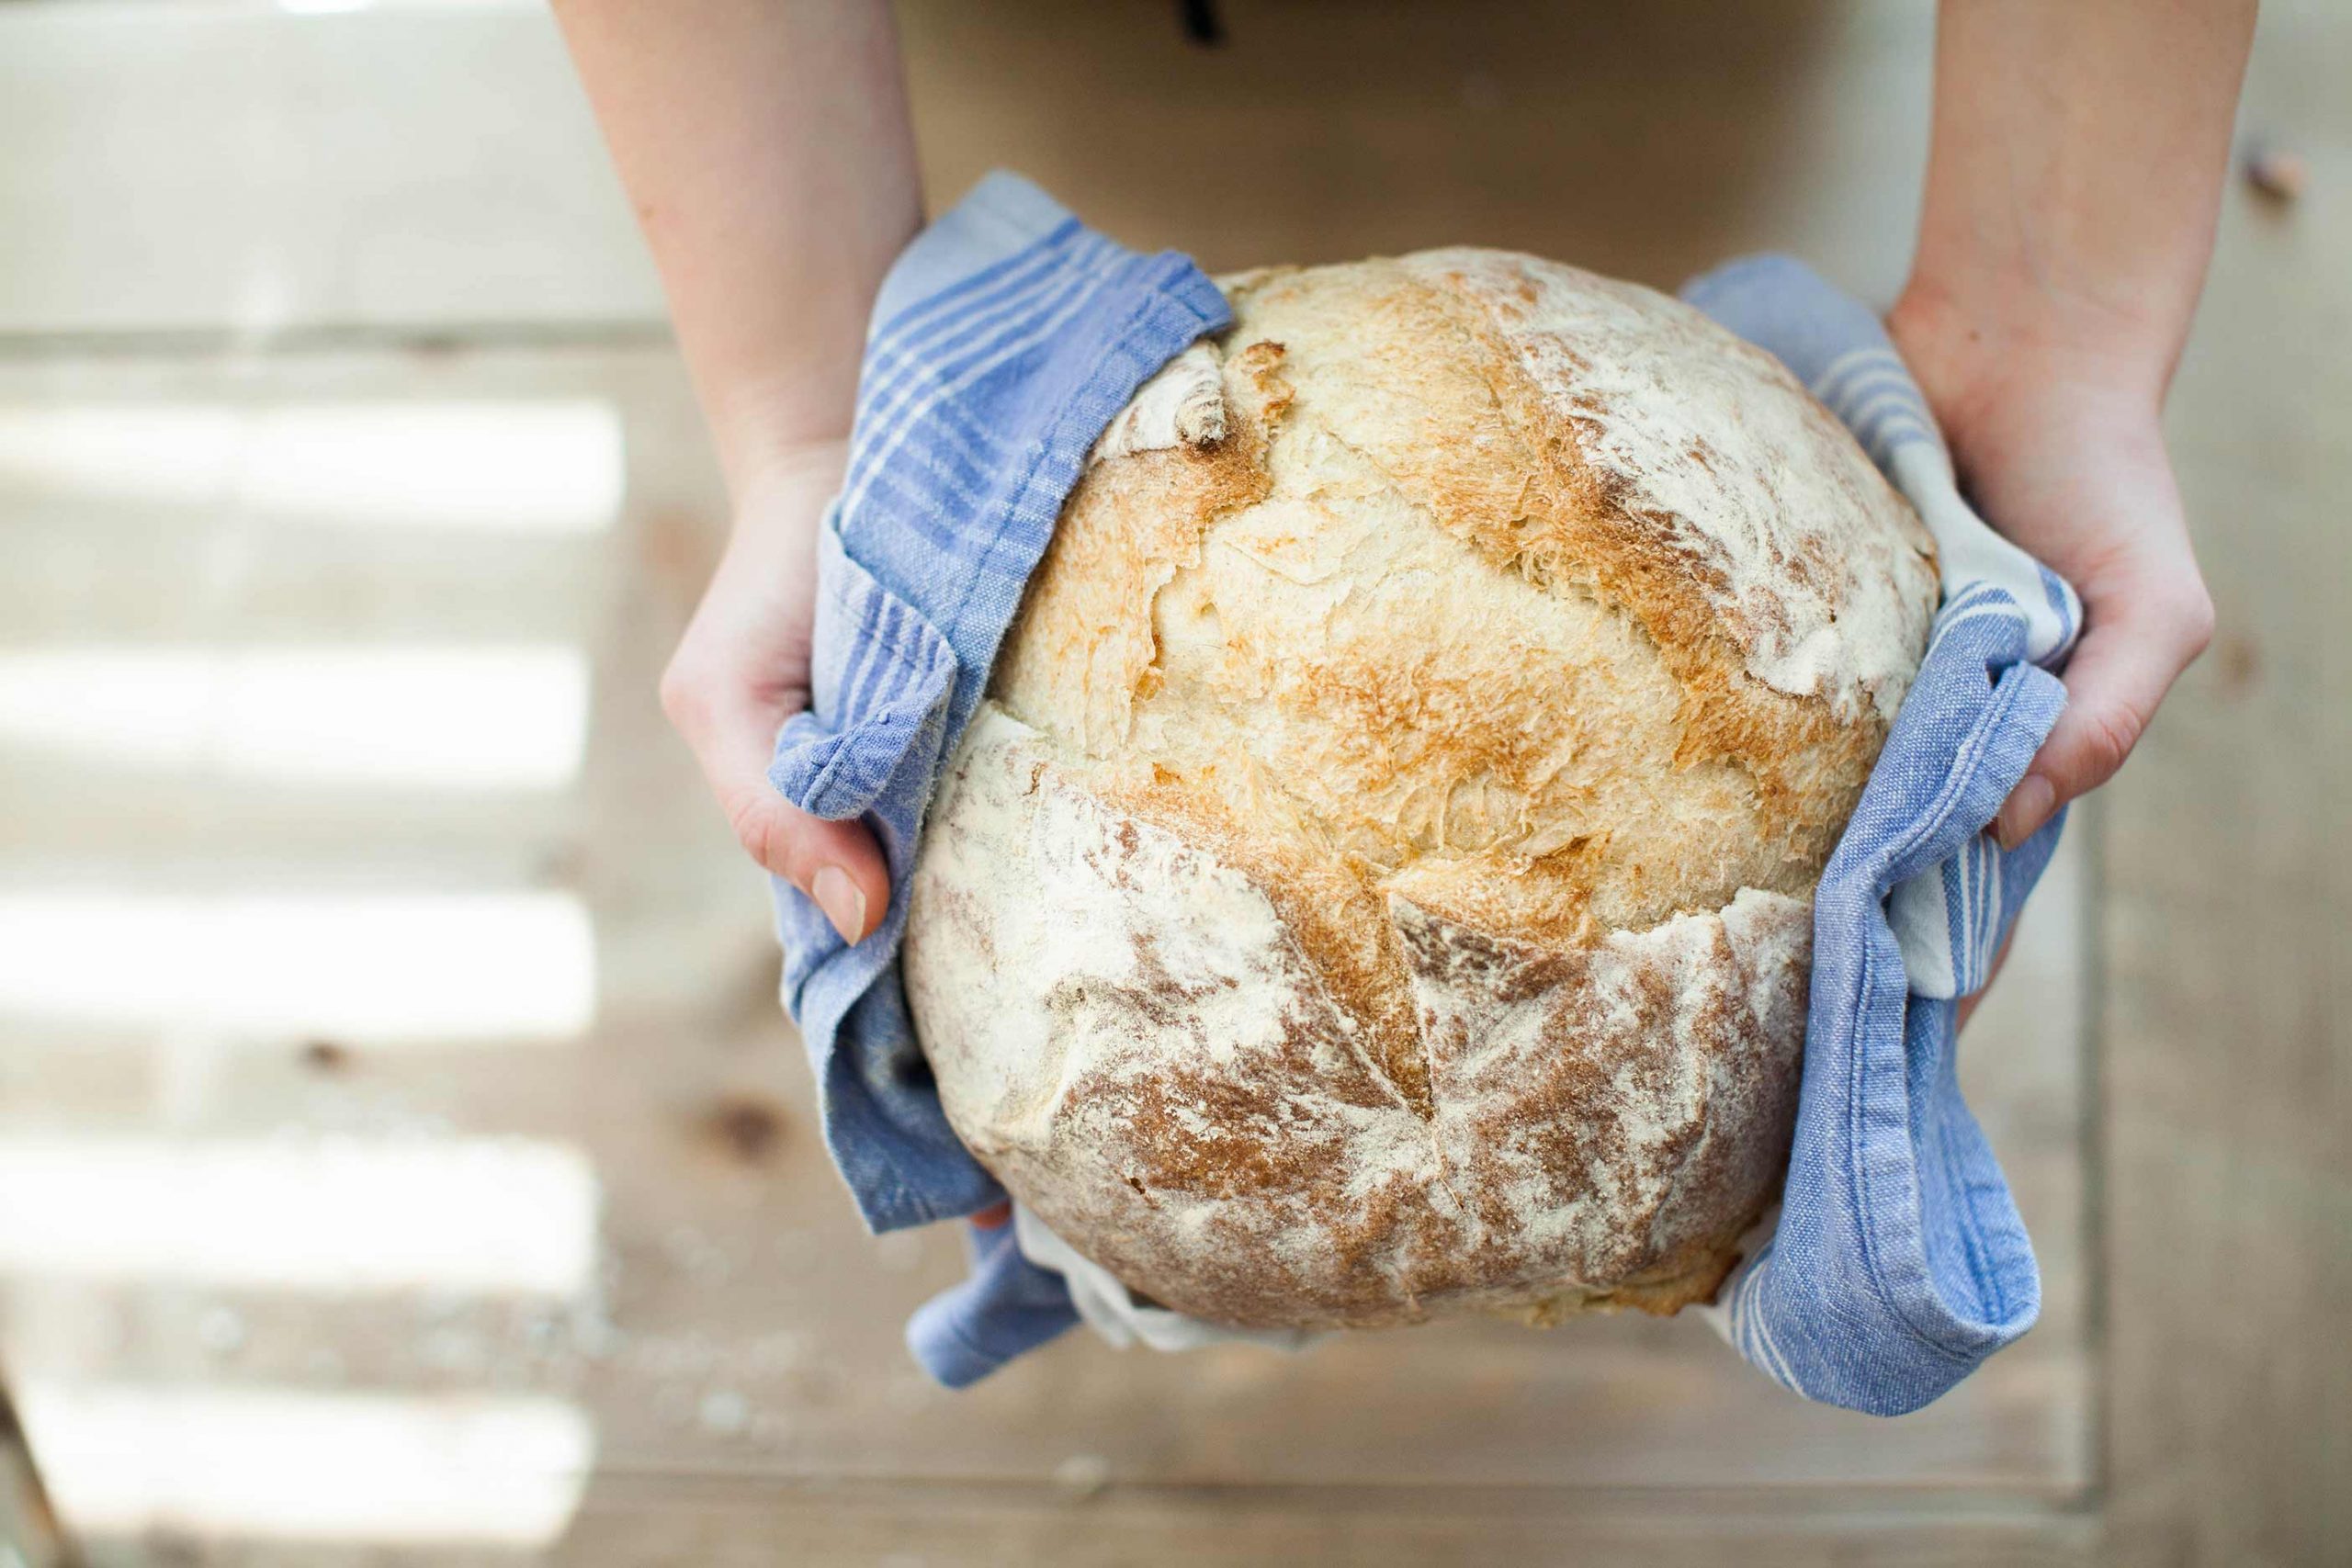 A woman holds a fresh loaf of bread